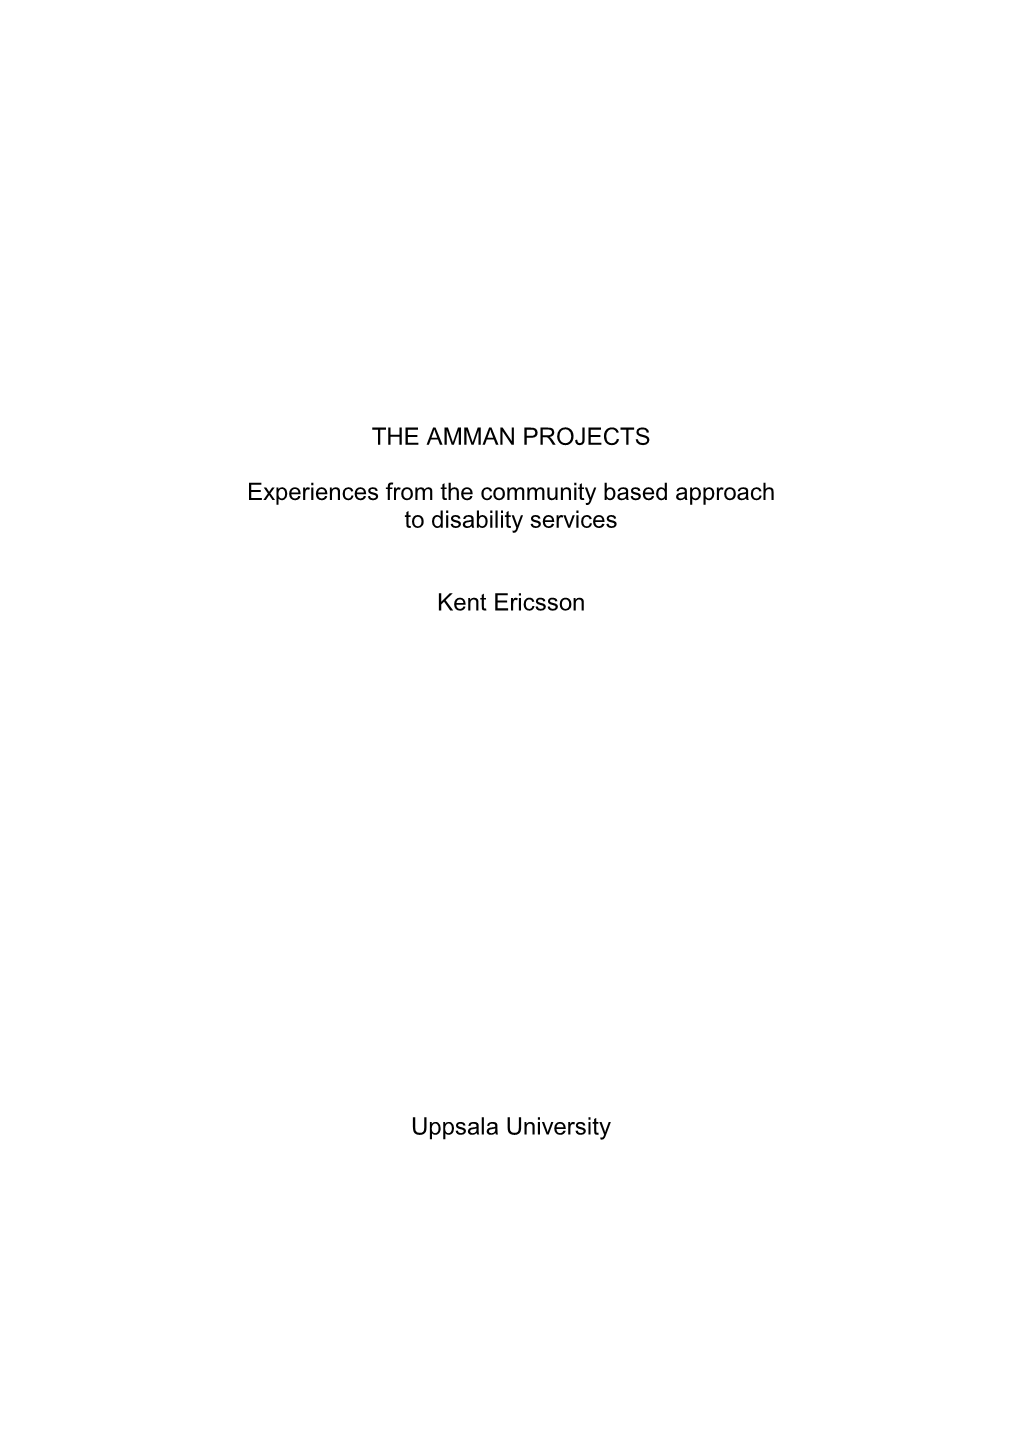 THE AMMAN PROJECTS Experiences from the Community